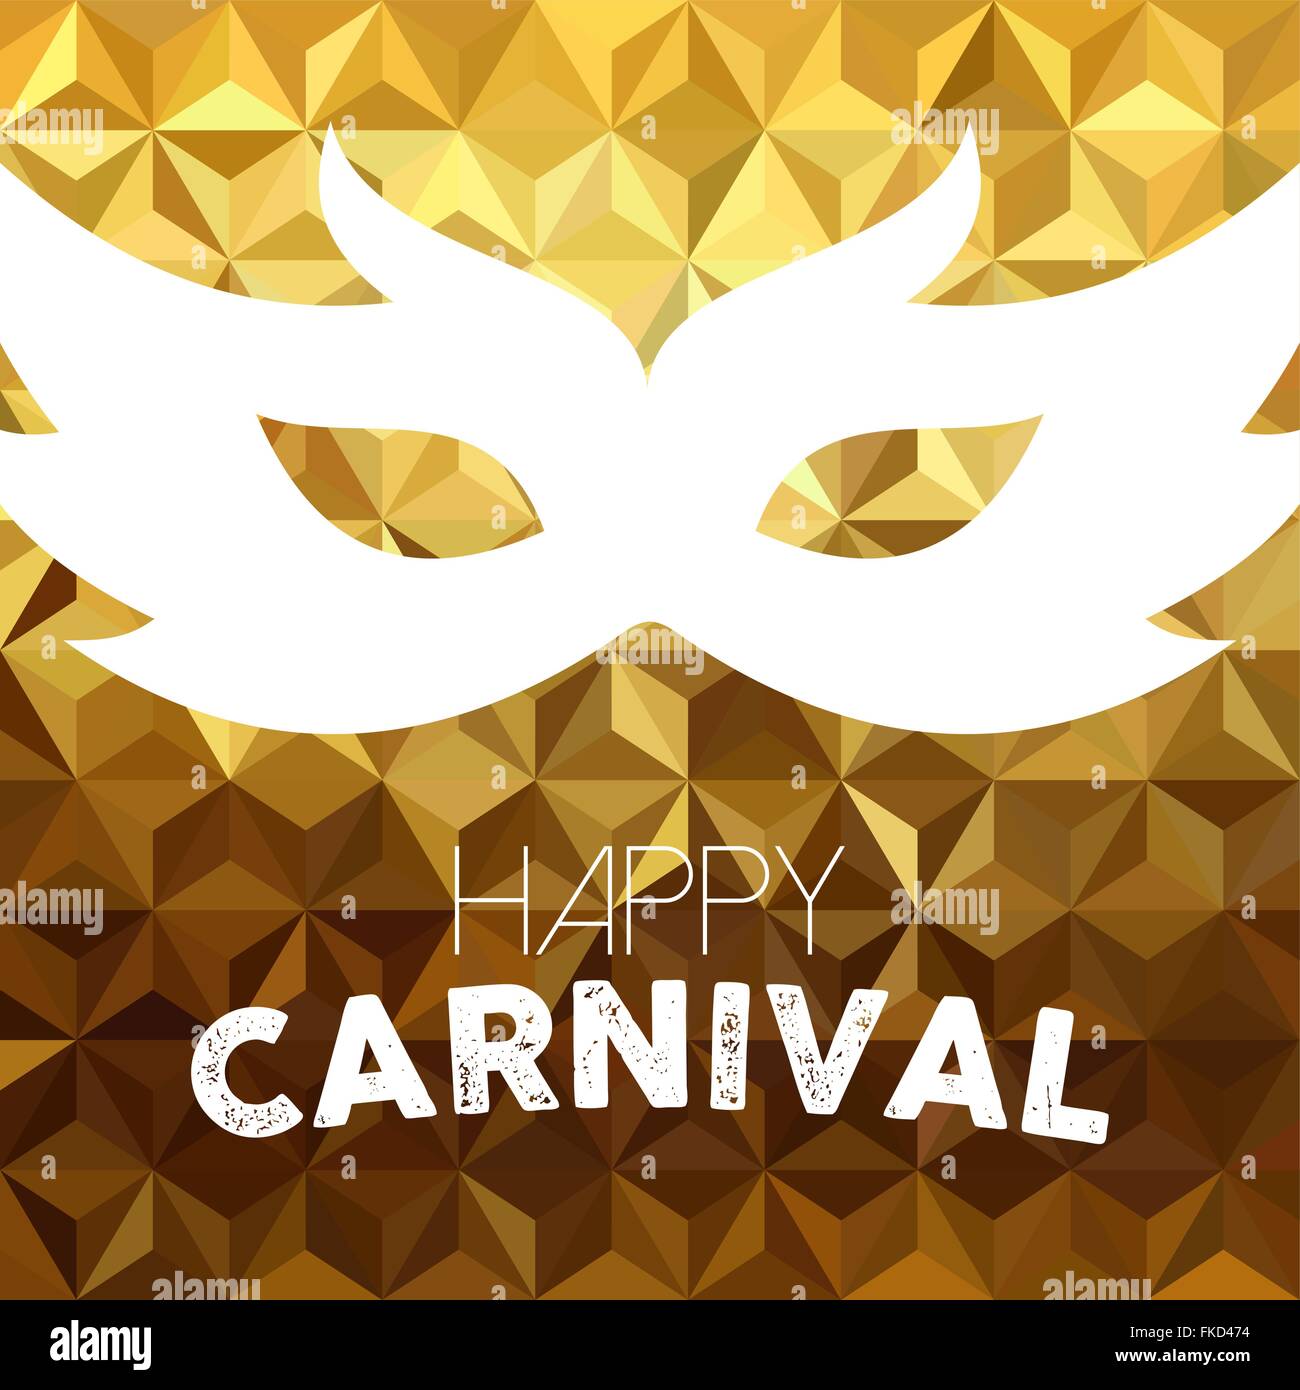 Happy carnival design, vintage costume mask with text on gold luxury background. EPS10 vector. Stock Vector